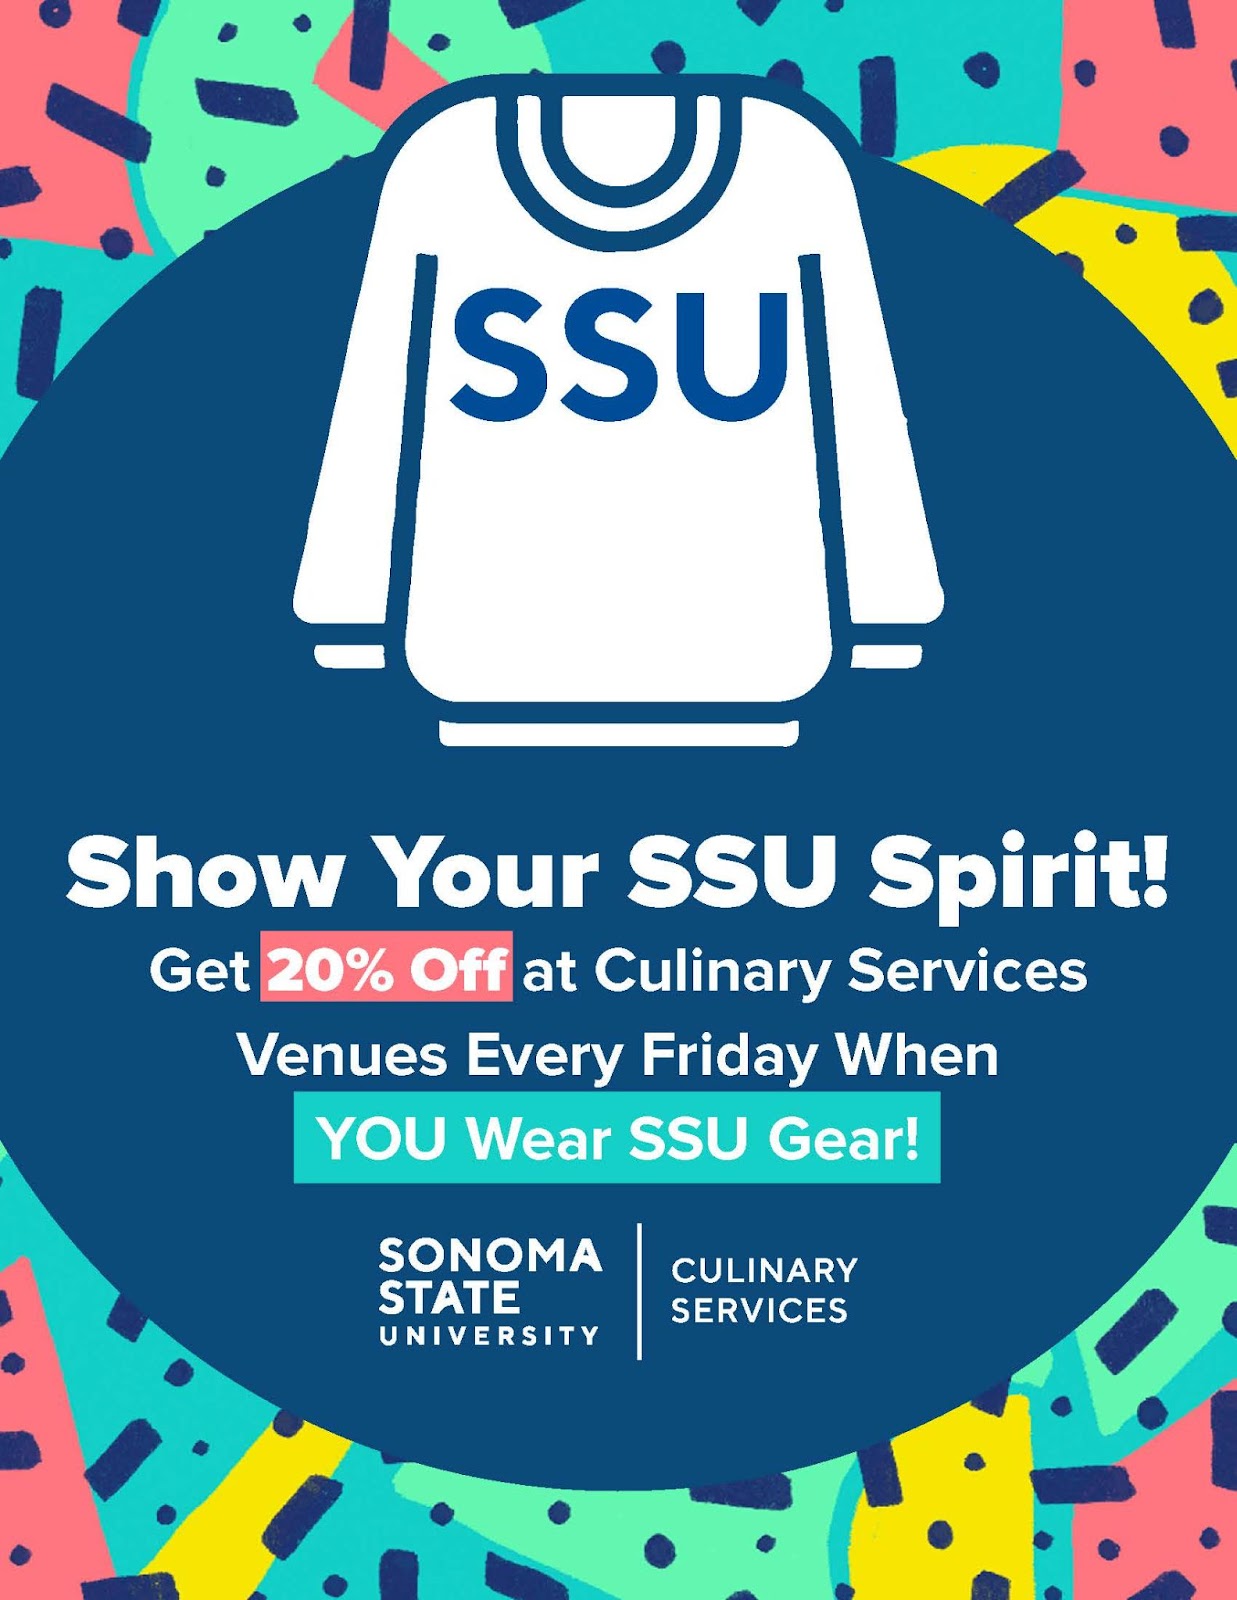 The event flyer for "Show Your SSU Spirit" 